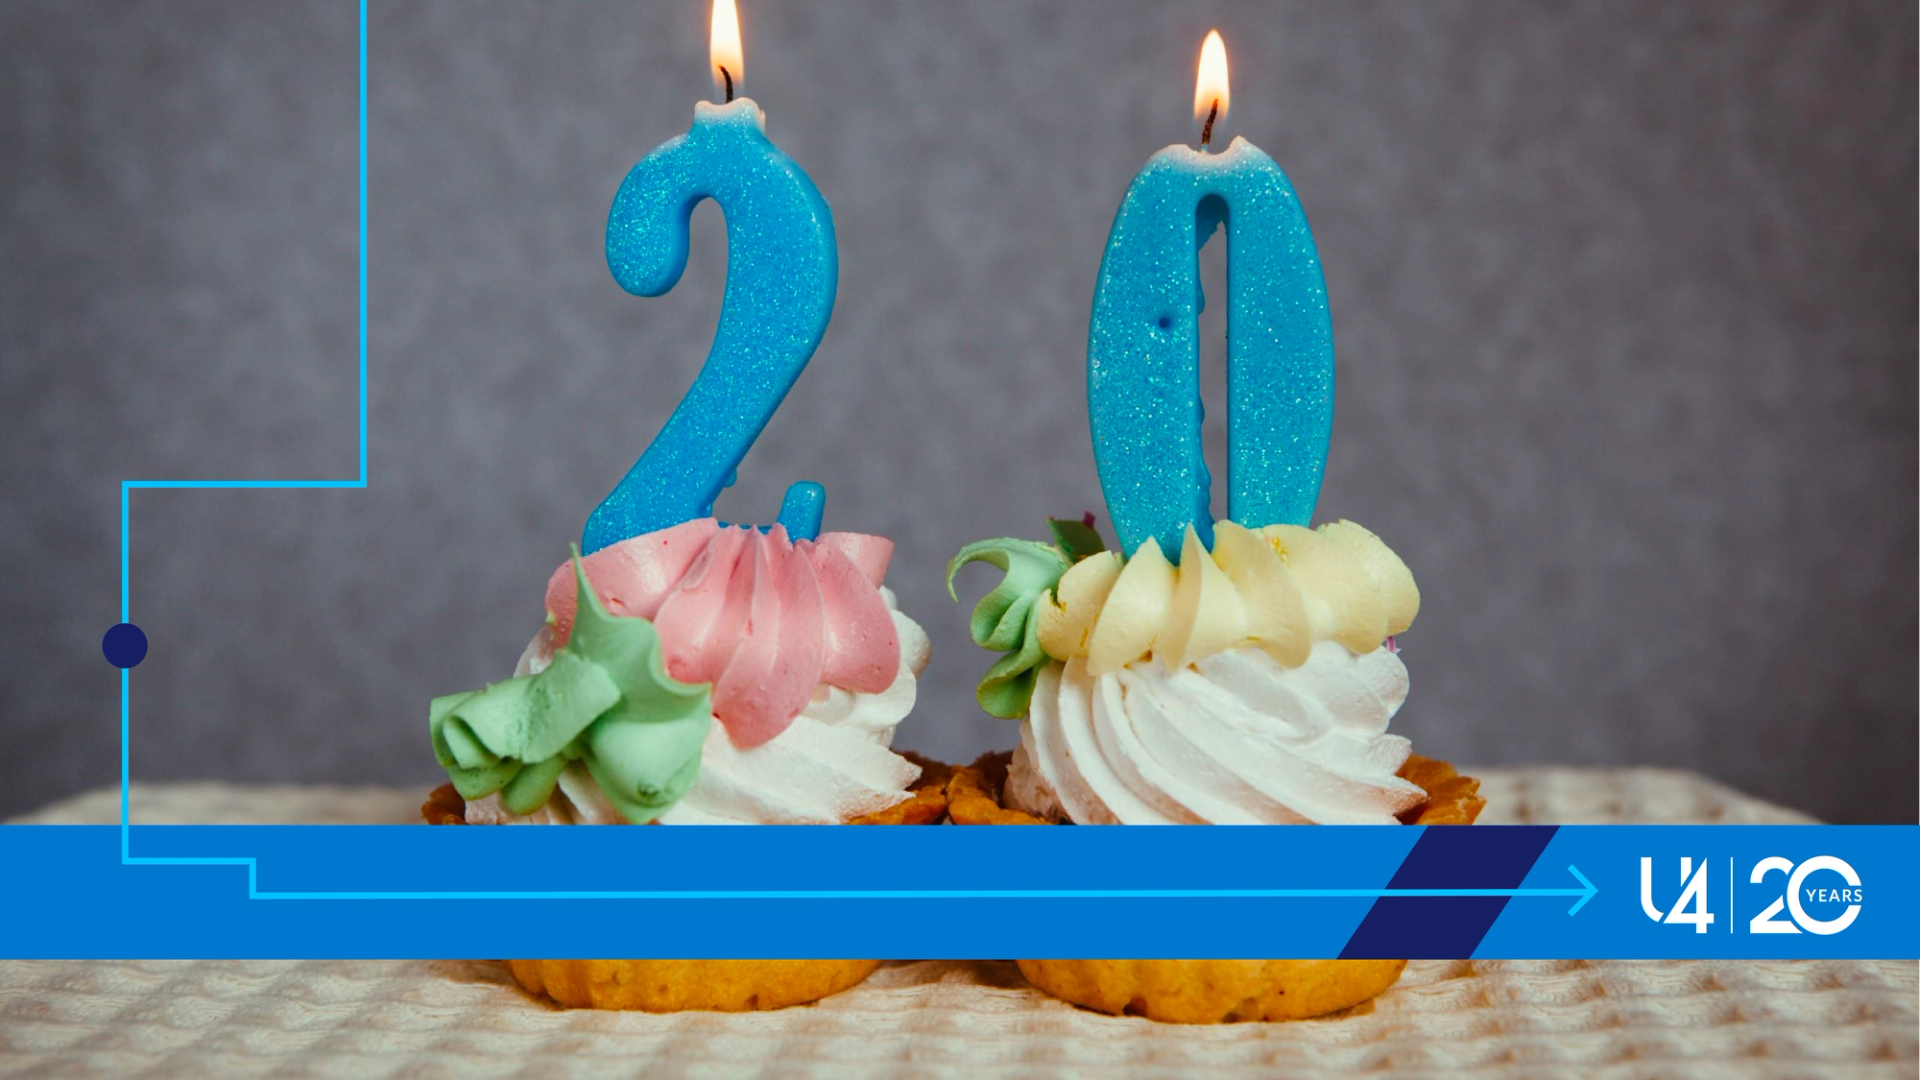 Close up photo of two cupcakes, with frosting on top. Both have lit candles on top, the left one shaped like a figure 2, the right one shaped like a zero.